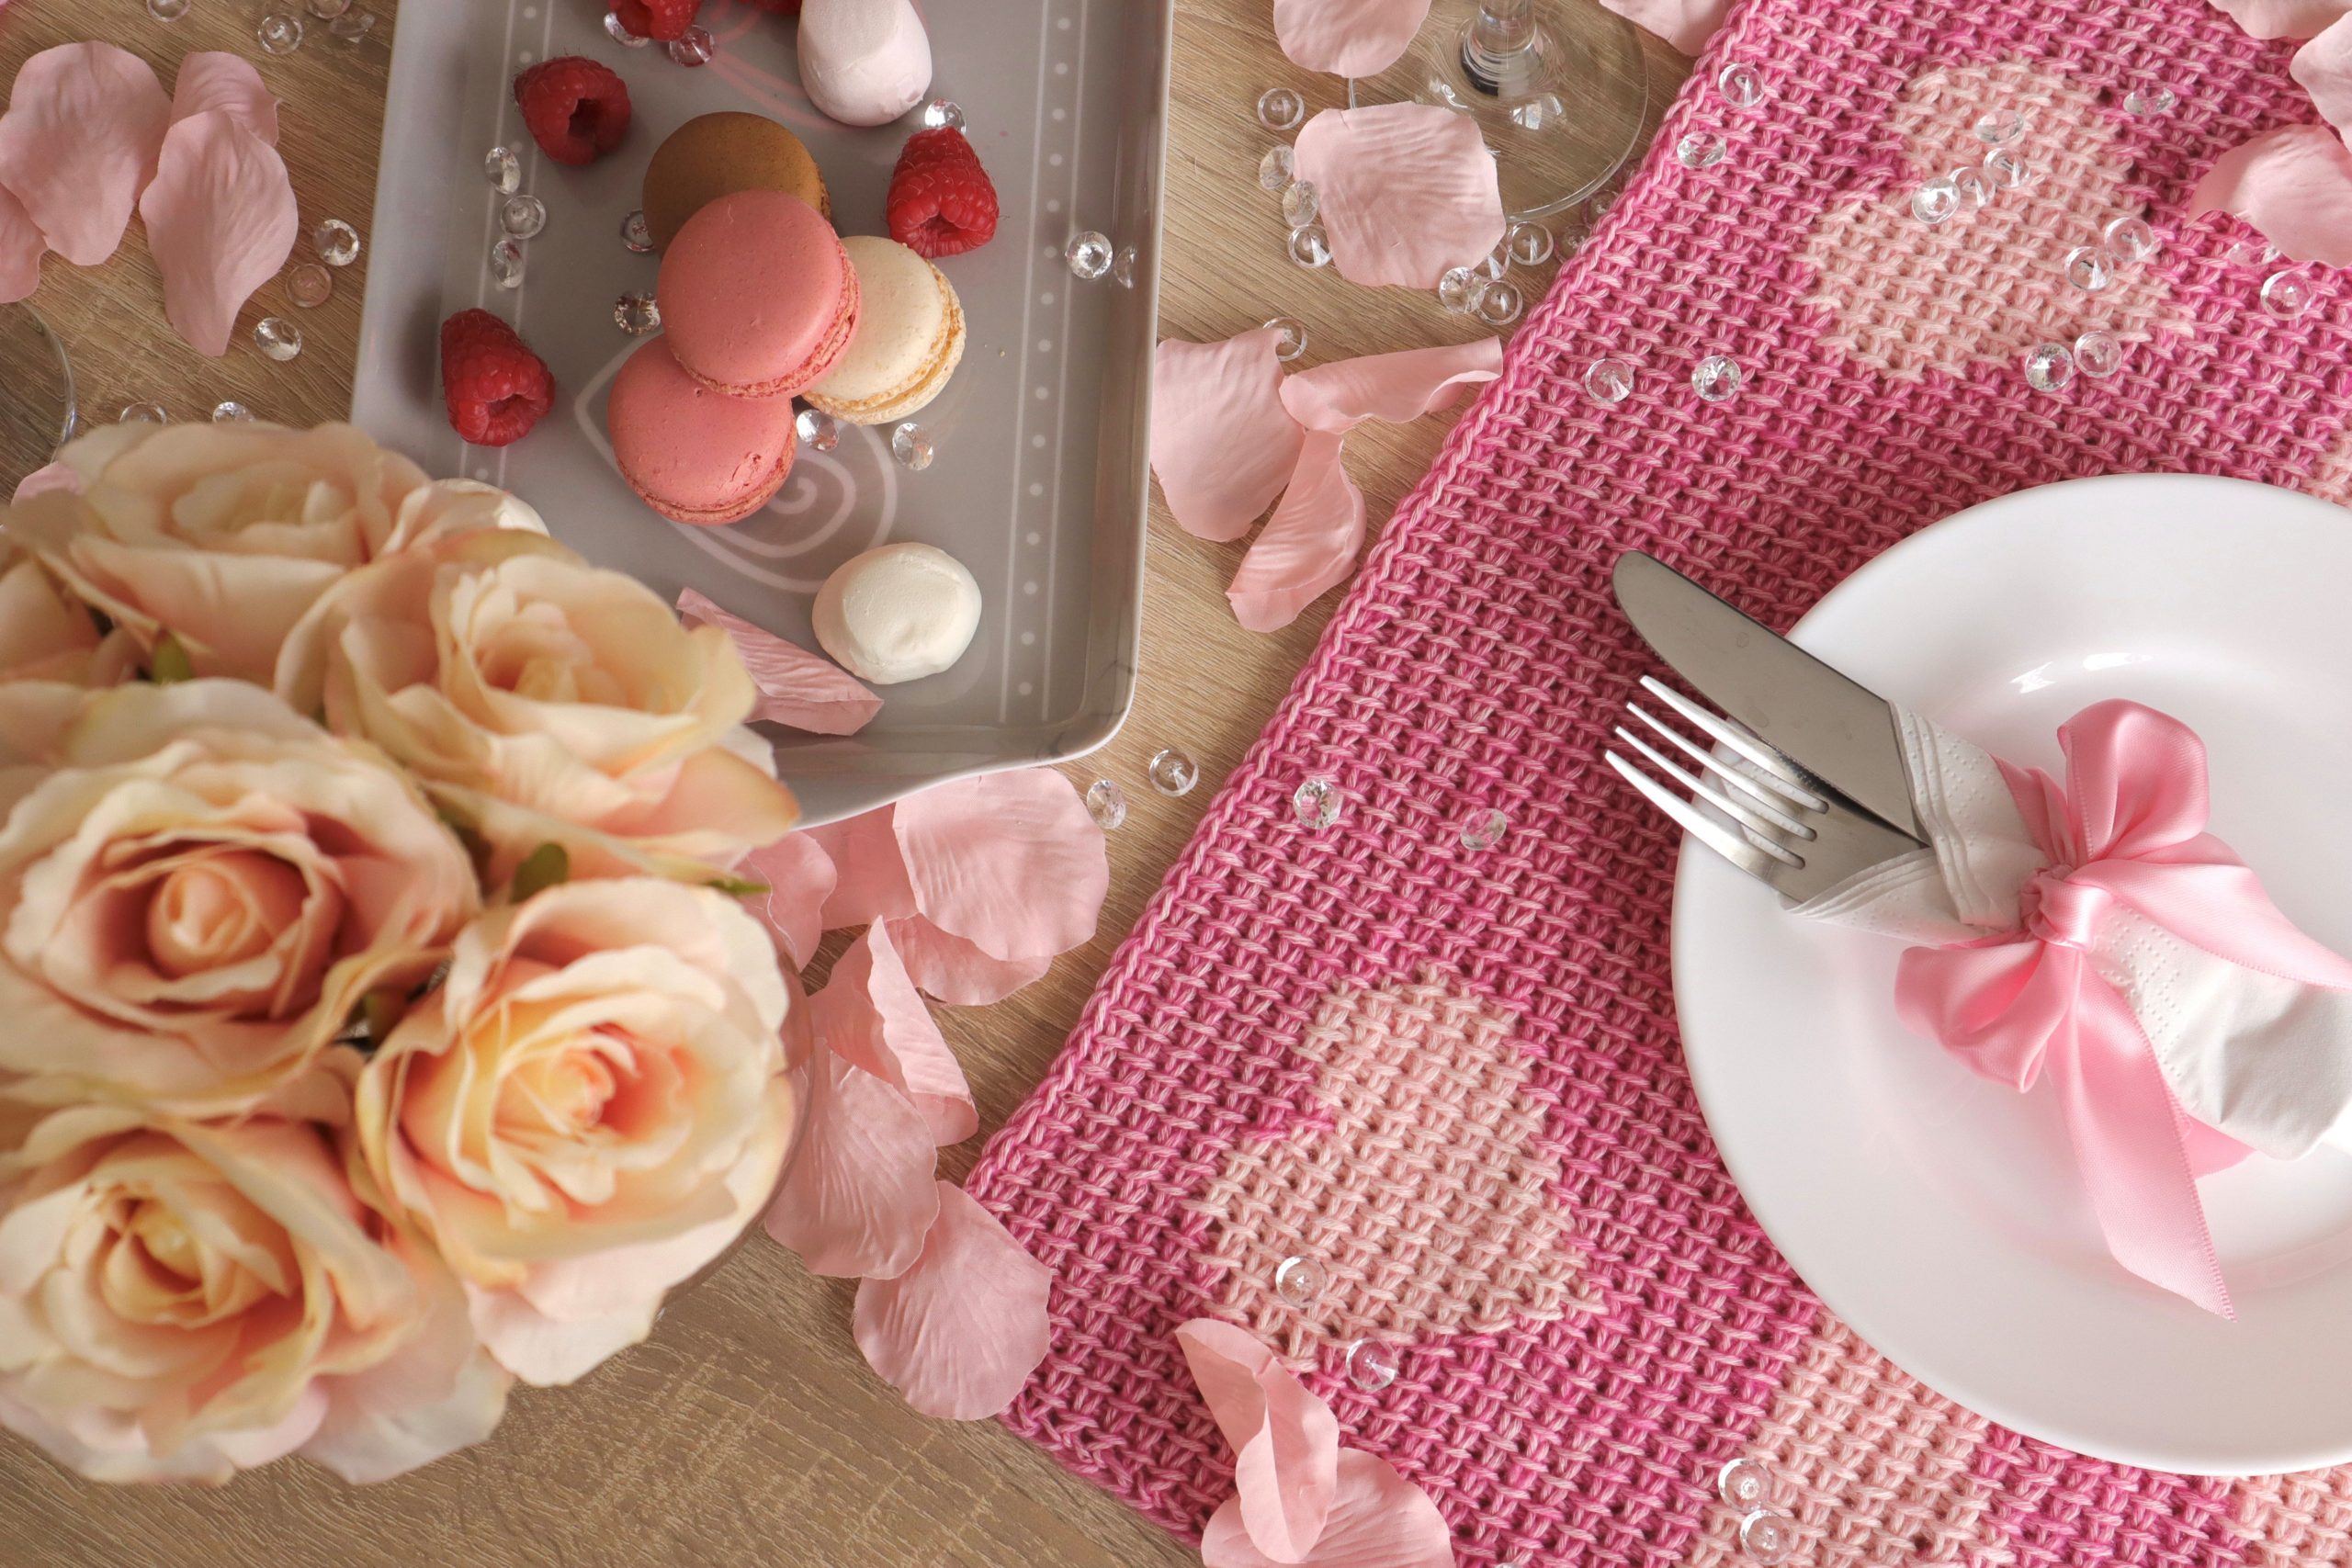 Sweetheart Placemat